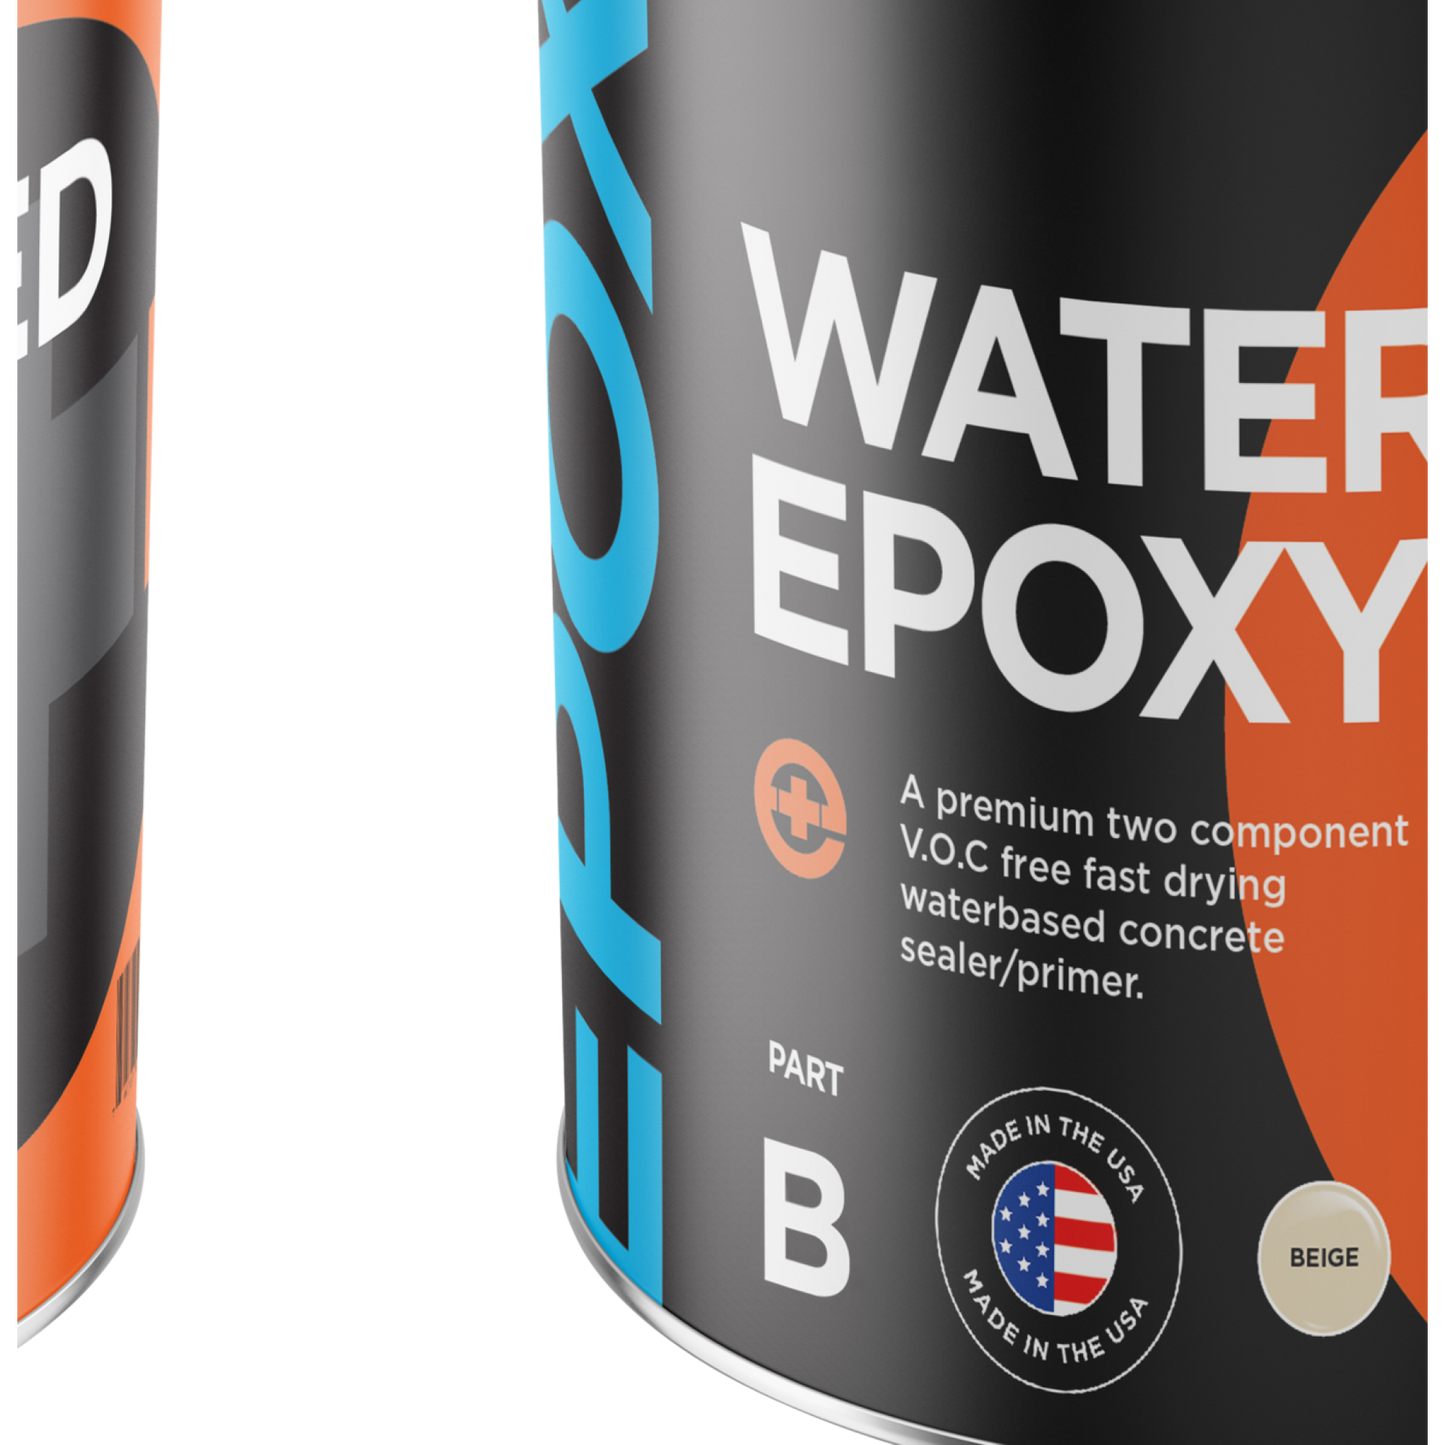 BEIGE Water-Based Epoxy Resin - Achieve Long-Lasting Beauty with Ease